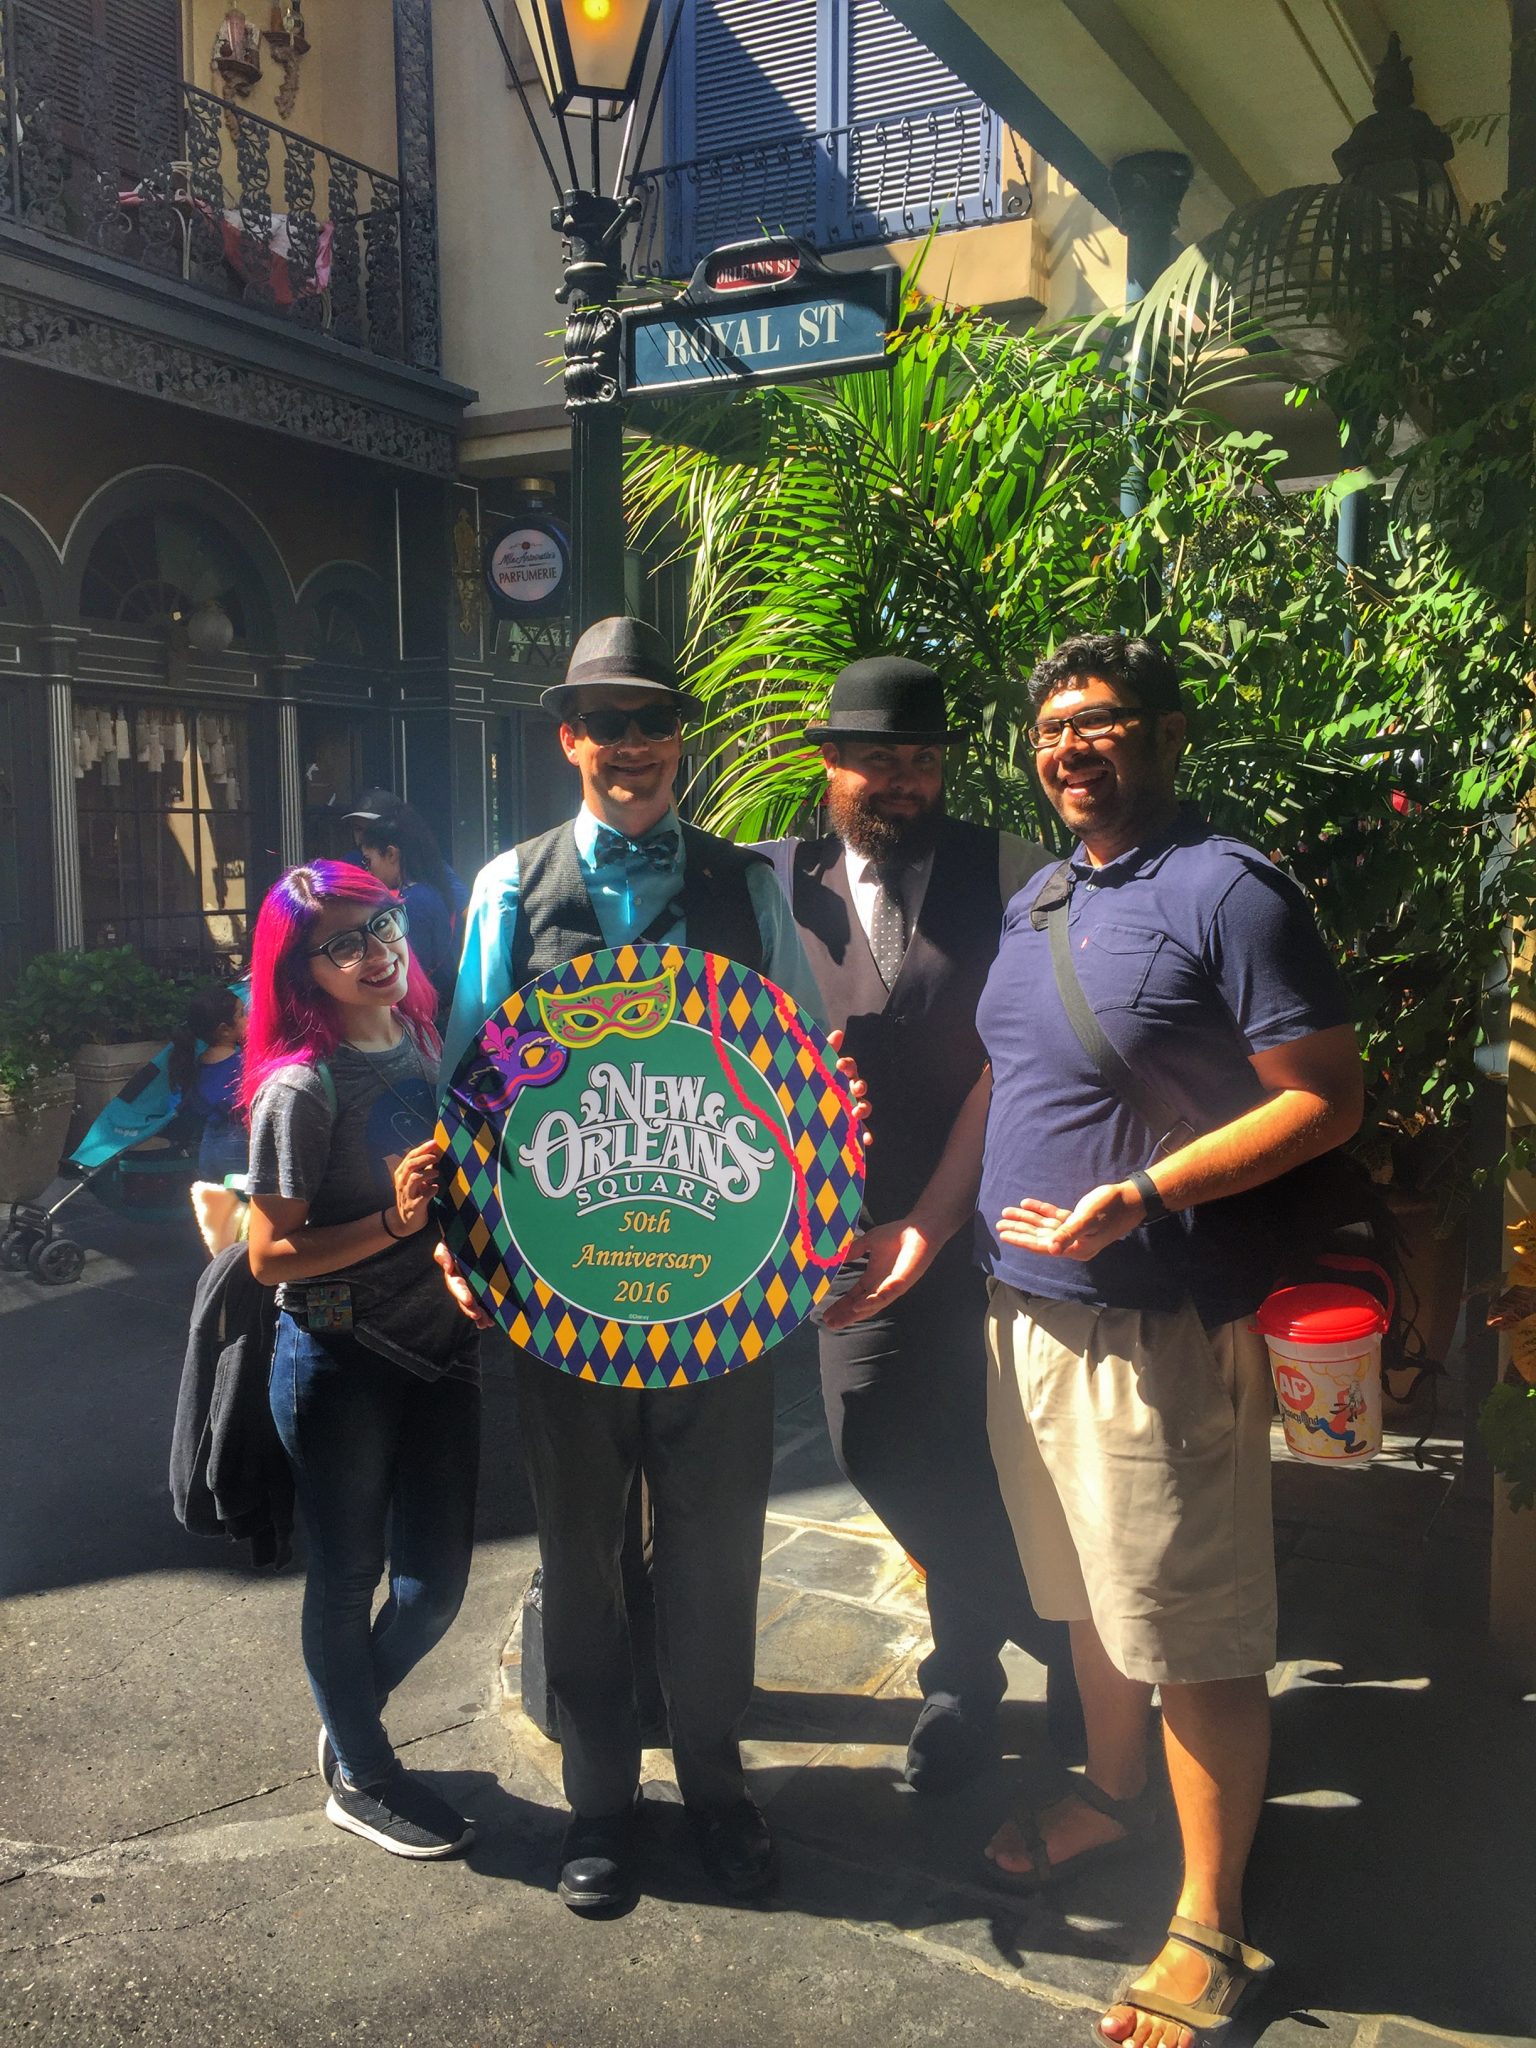 New Orleans Square 50th Anniversary – Sundays With DAPs